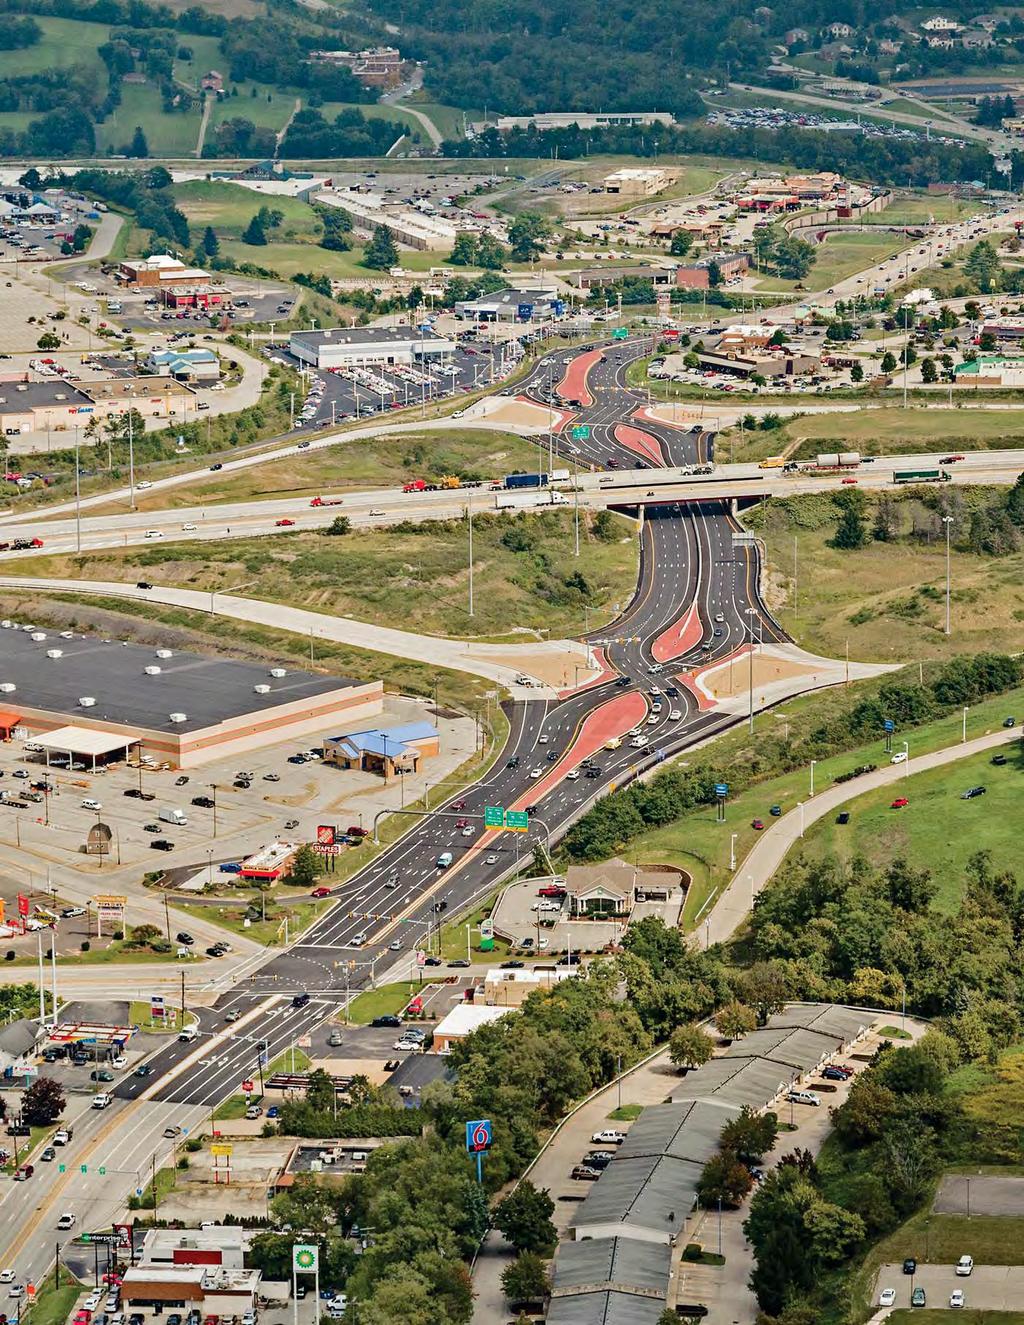 Photo 1: Seen here, I-70 and Route 19 interchange looking north.